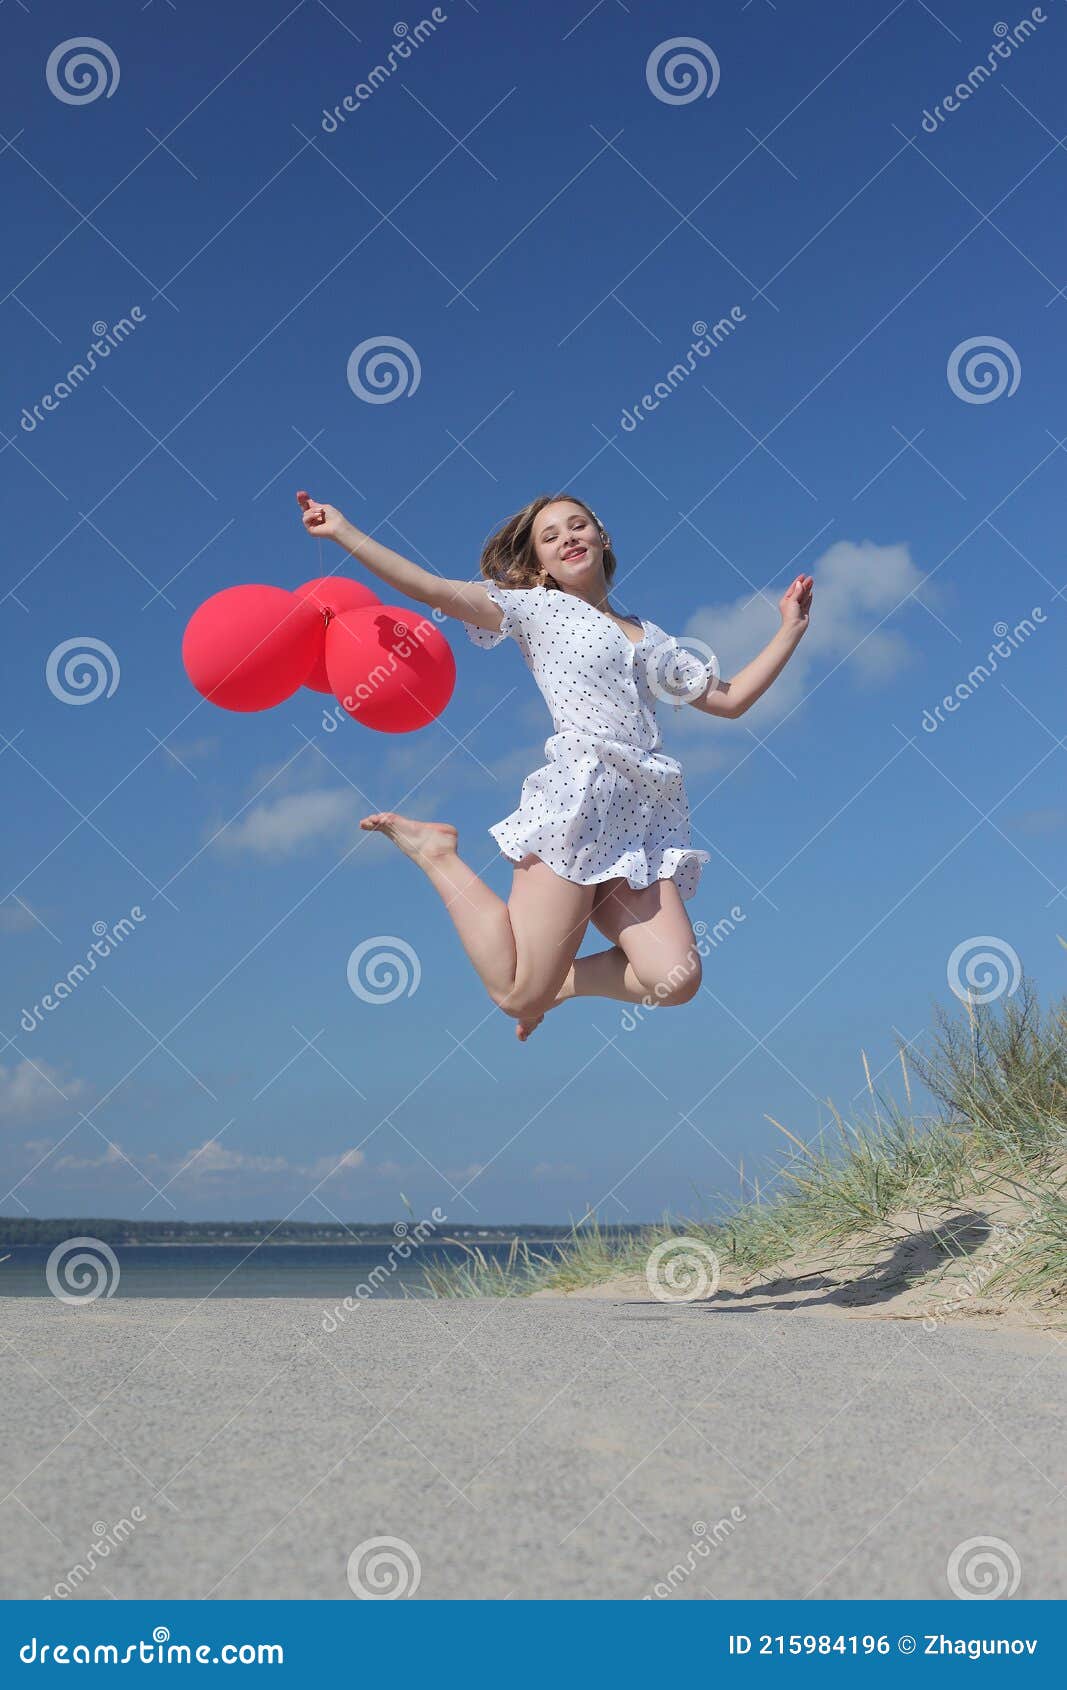 young happy girl in dress with red balloons